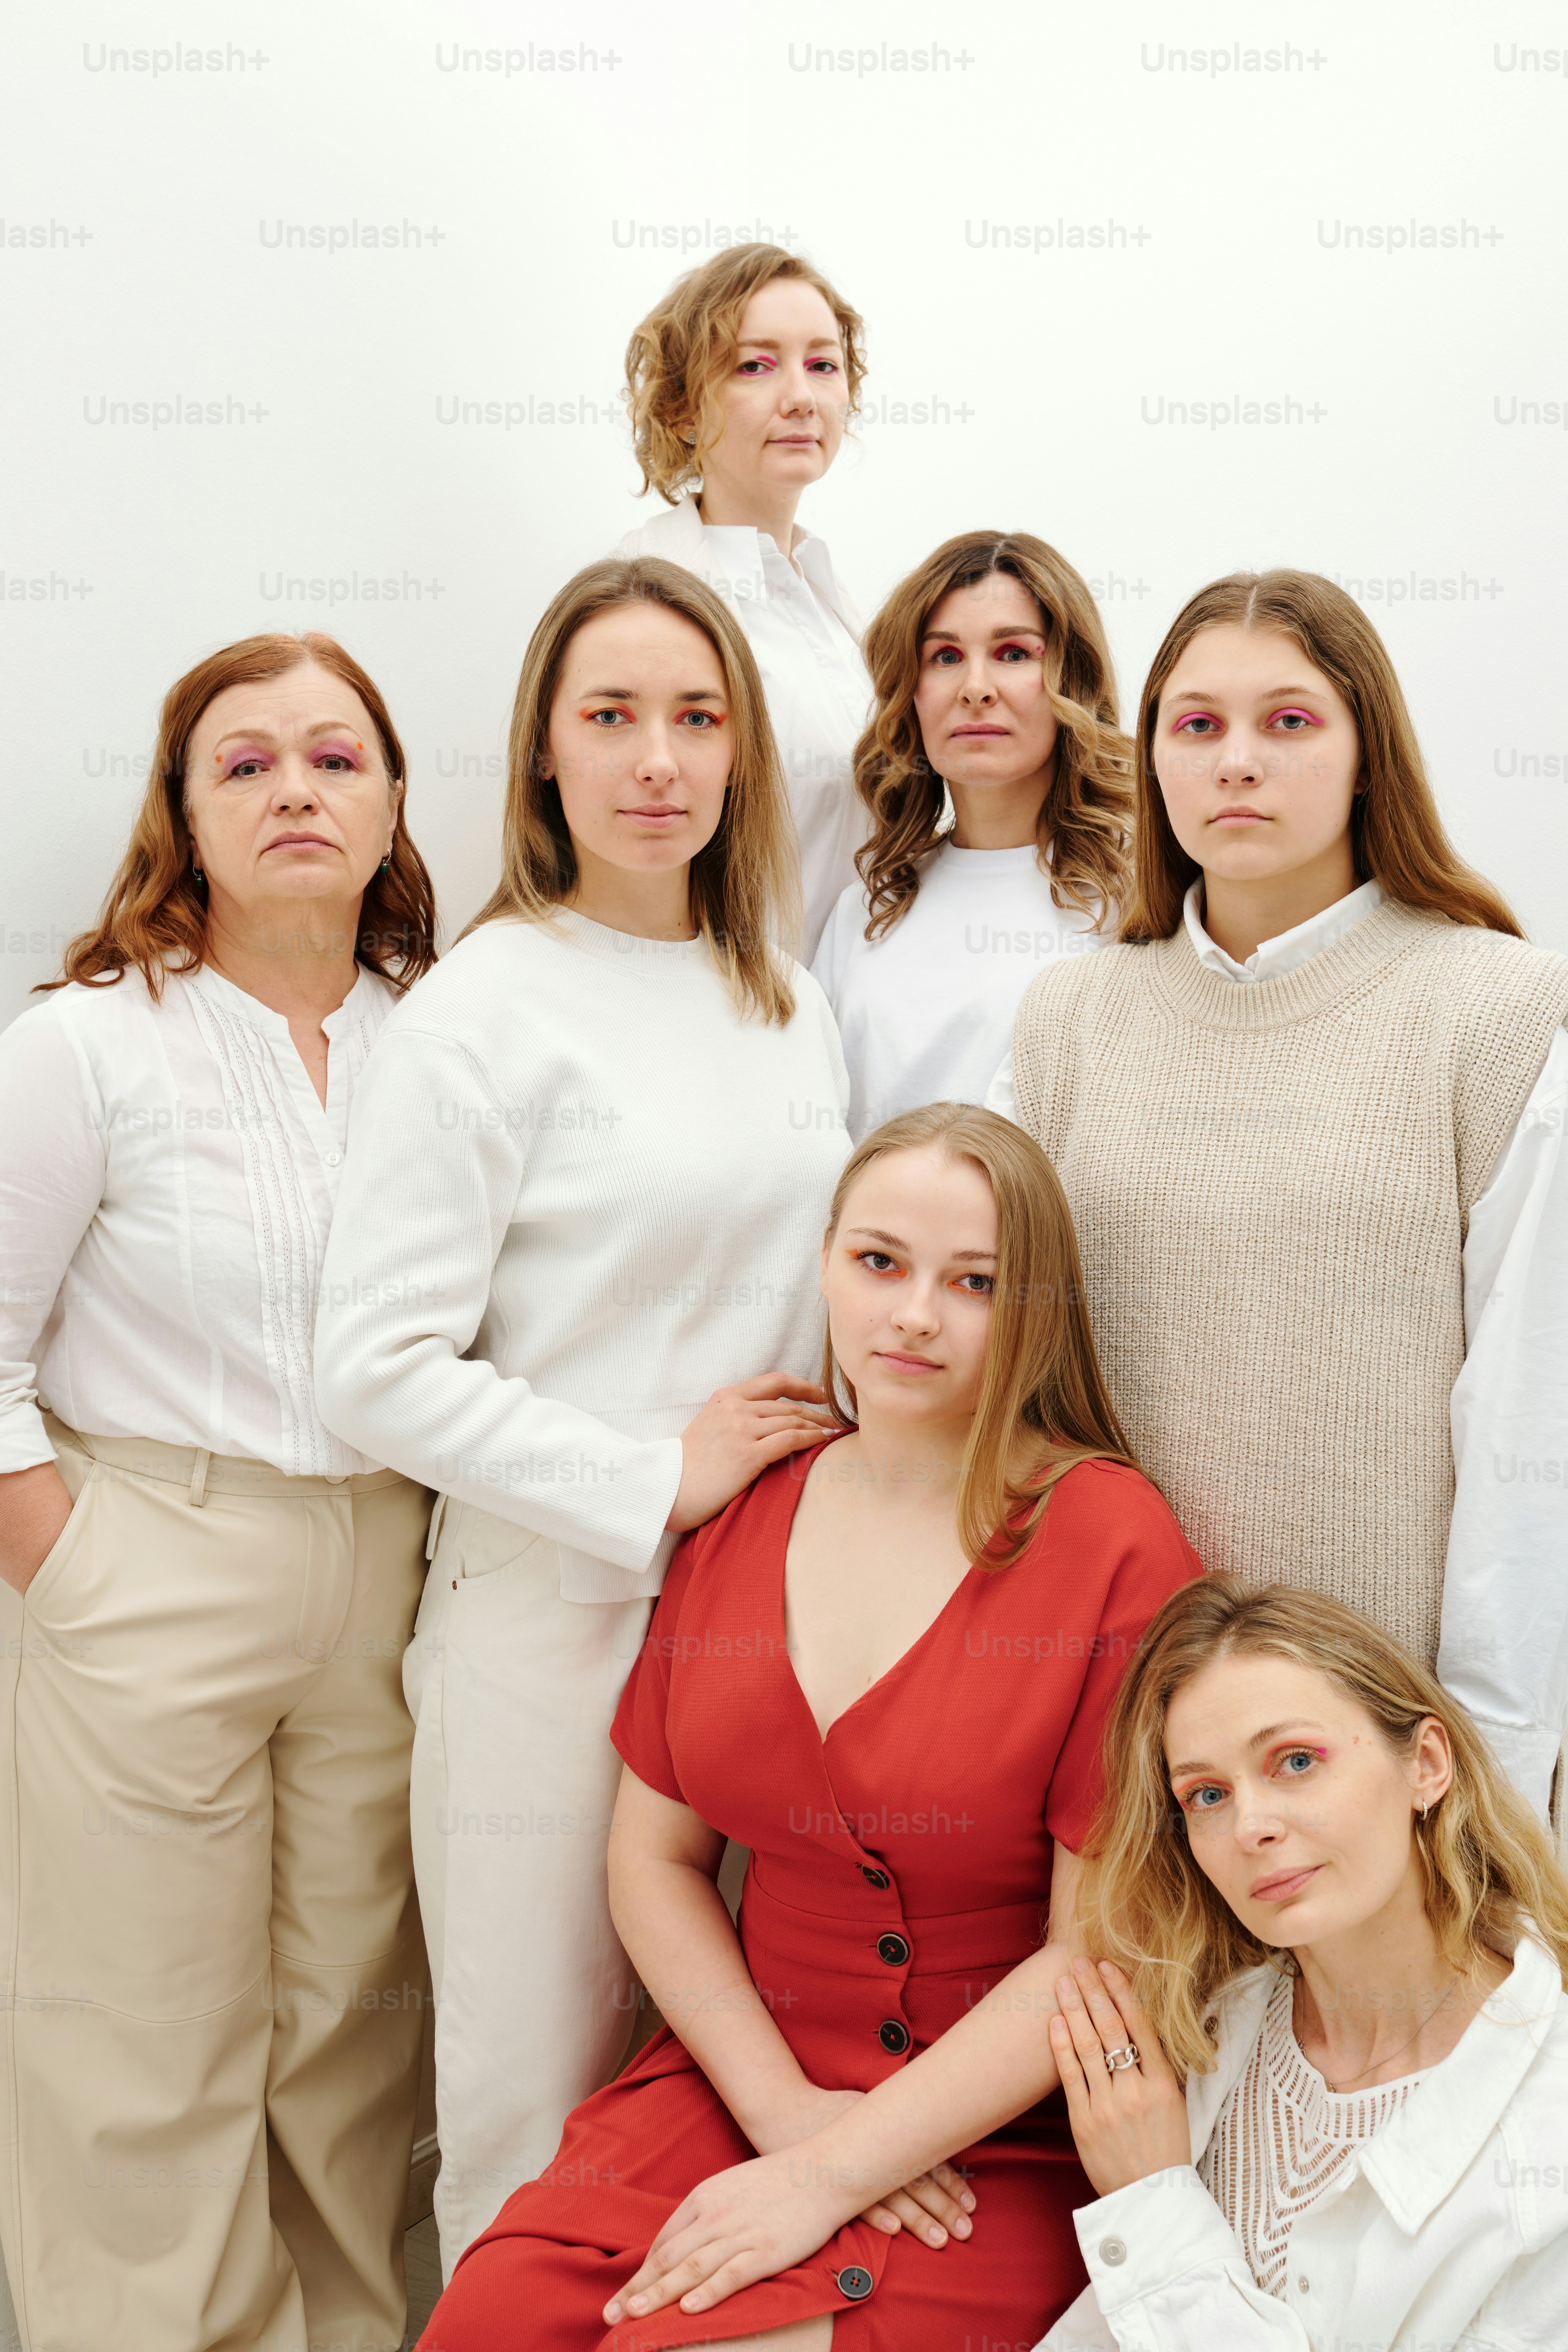 Studio portrait of a group of women of different ages and body types